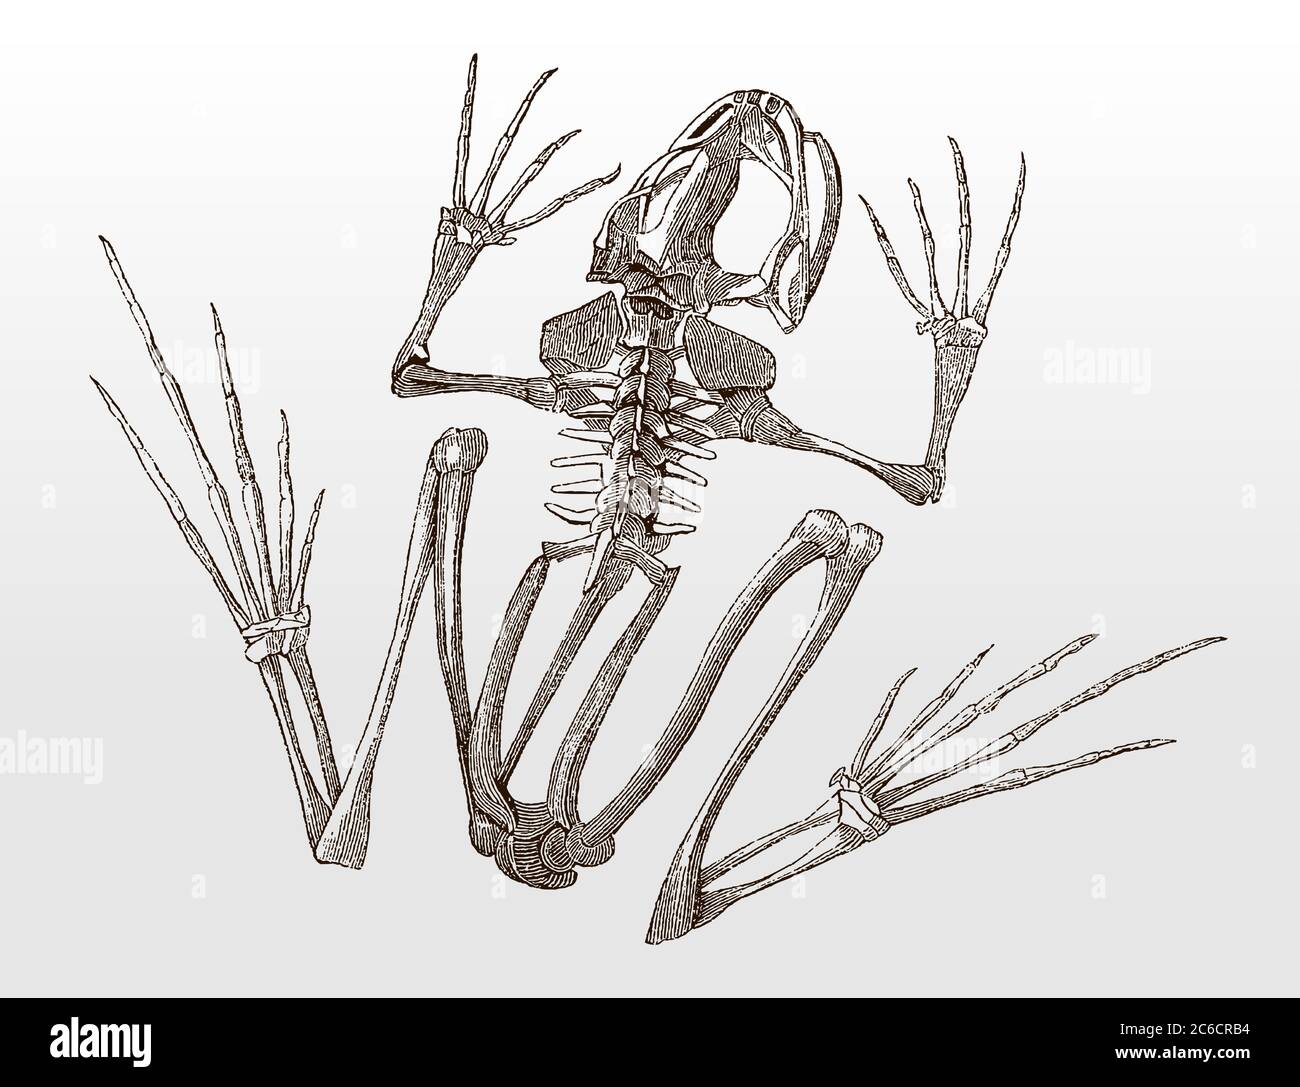 Skeleton of a frog in top view after an antique illustration from the 19th century Stock Vector